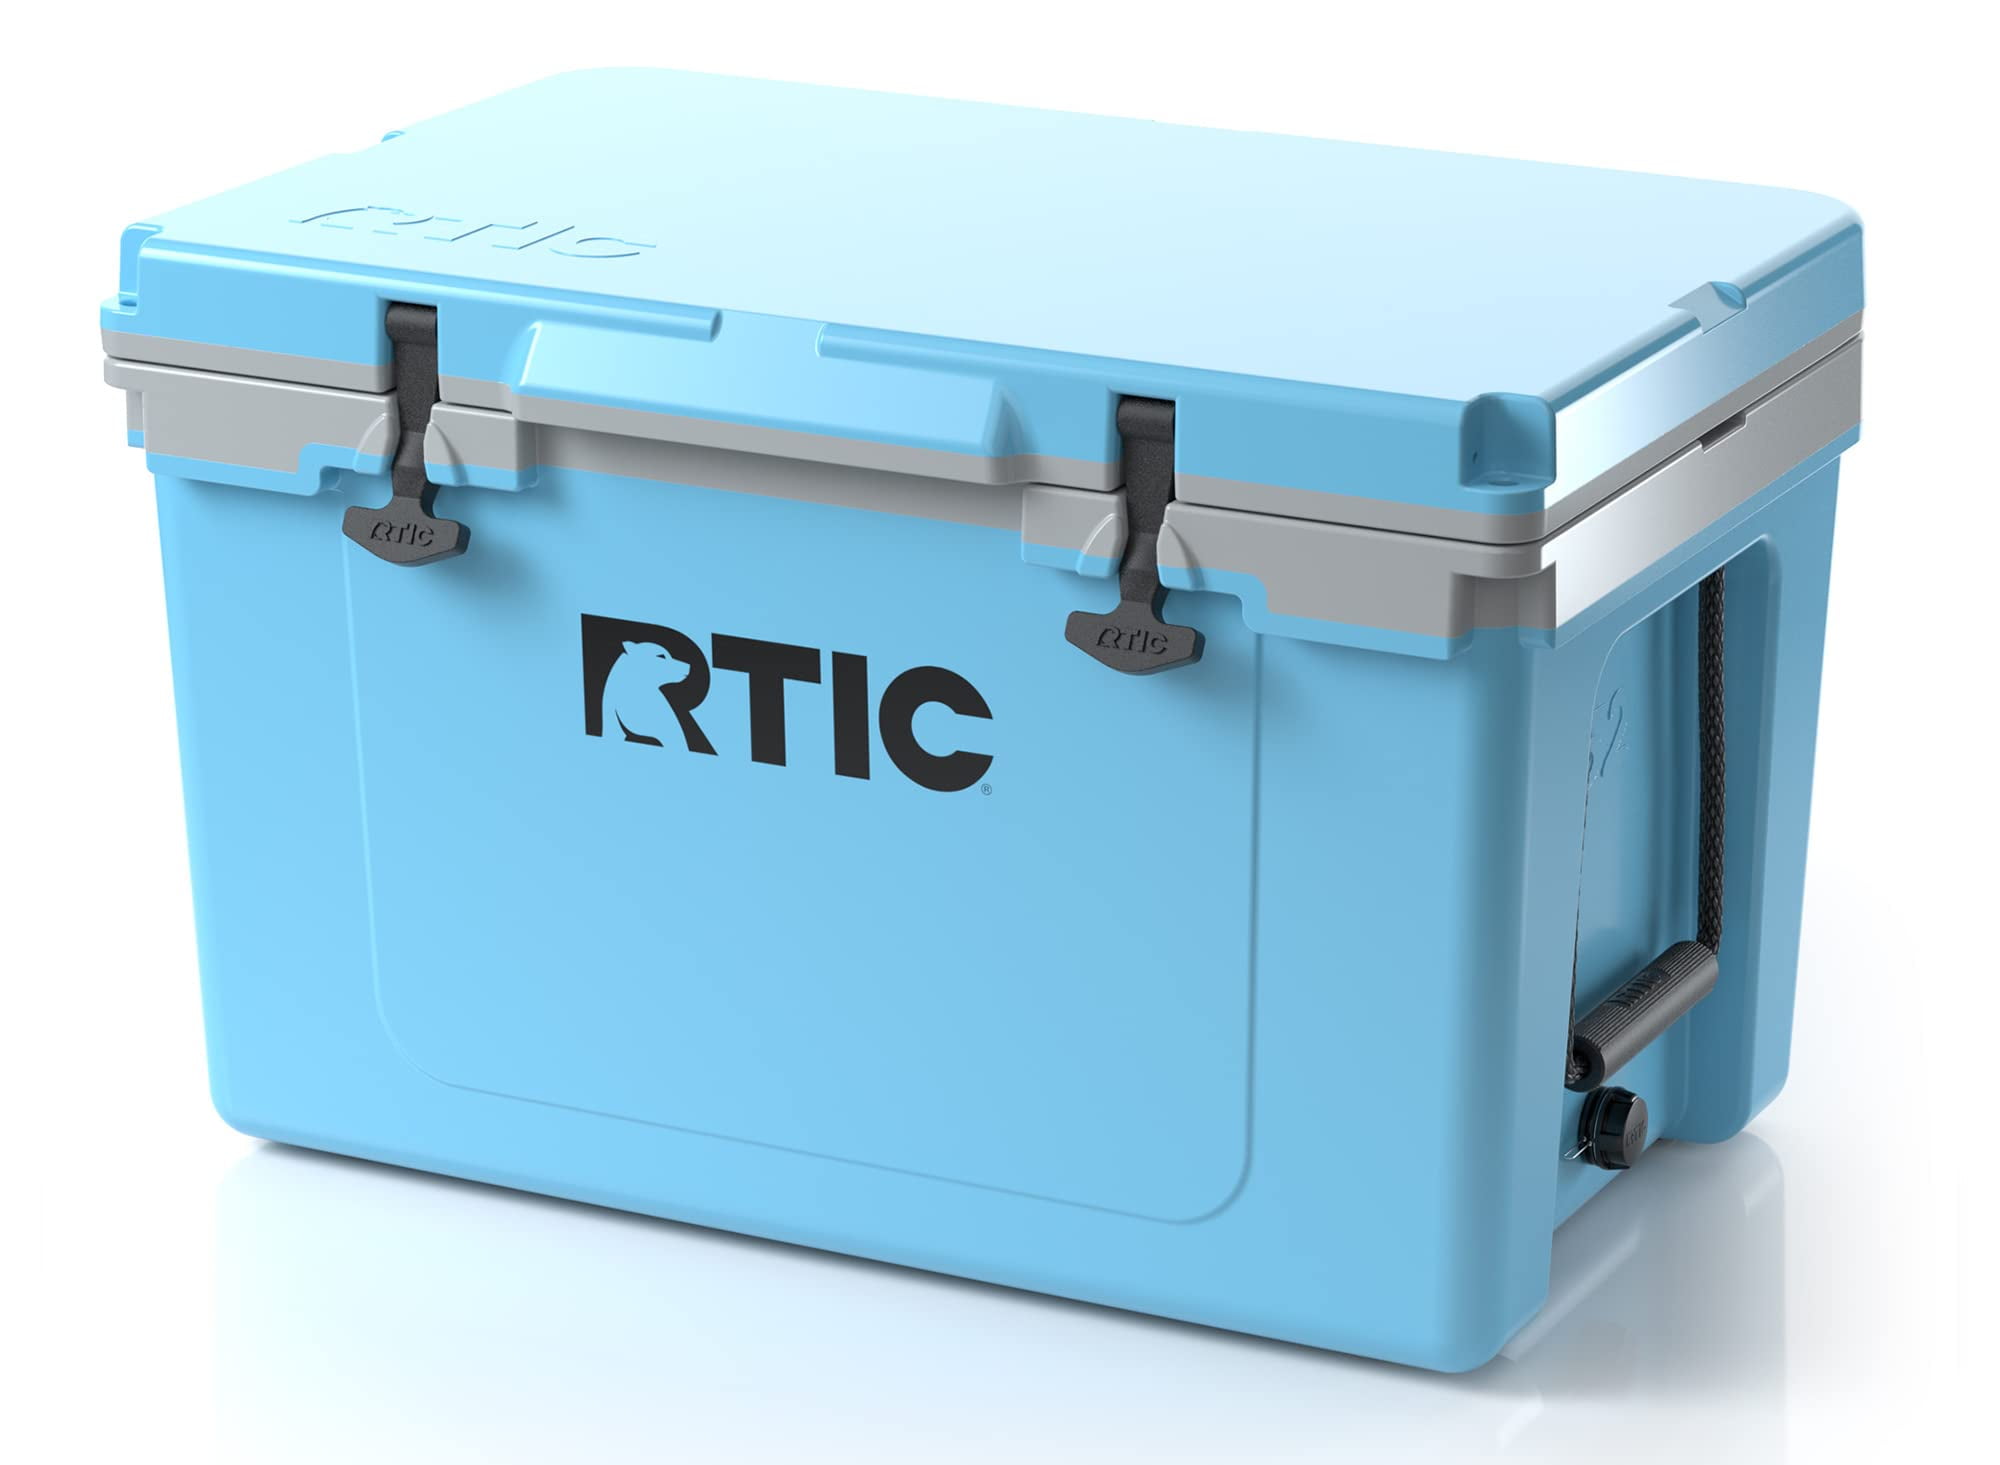 RTIC Ultra-Light 52 Quart Hard Cooler Insulated Portable Ice Chest Box for Beach, Drink, Beverage, Camping, Picnic, Fishing, Boat, Barbecue, 30%